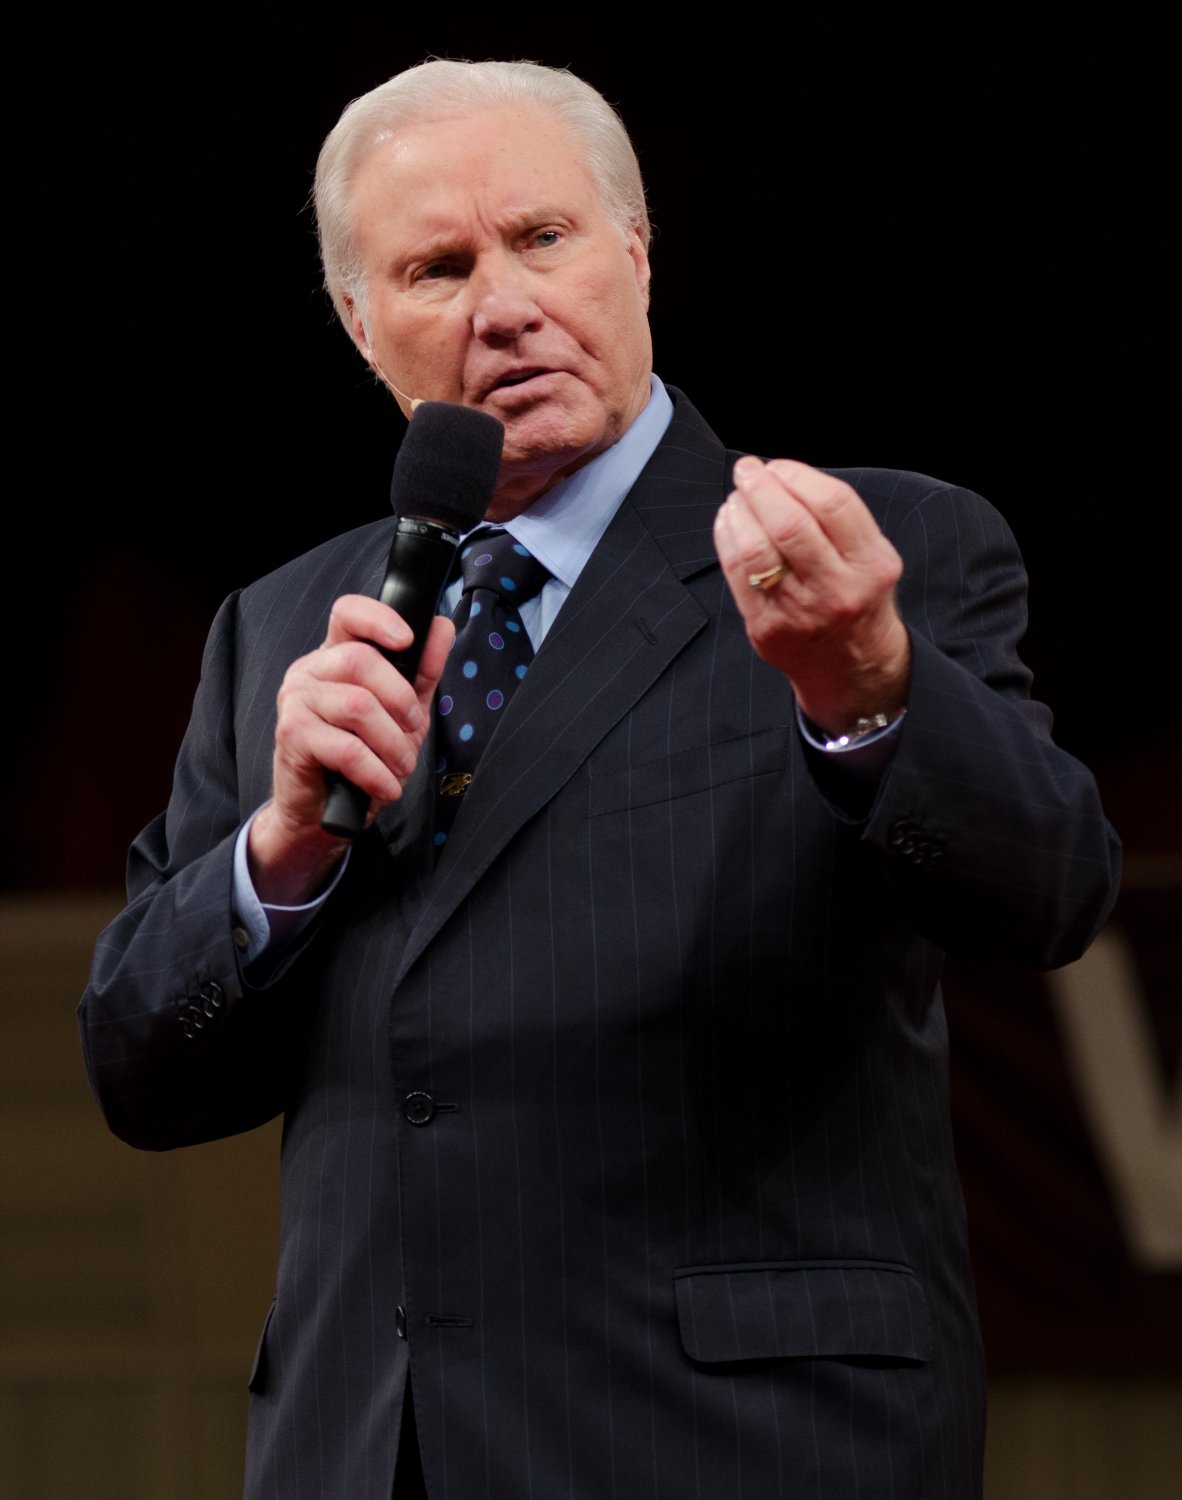 Jimmy Swaggart Defrocked